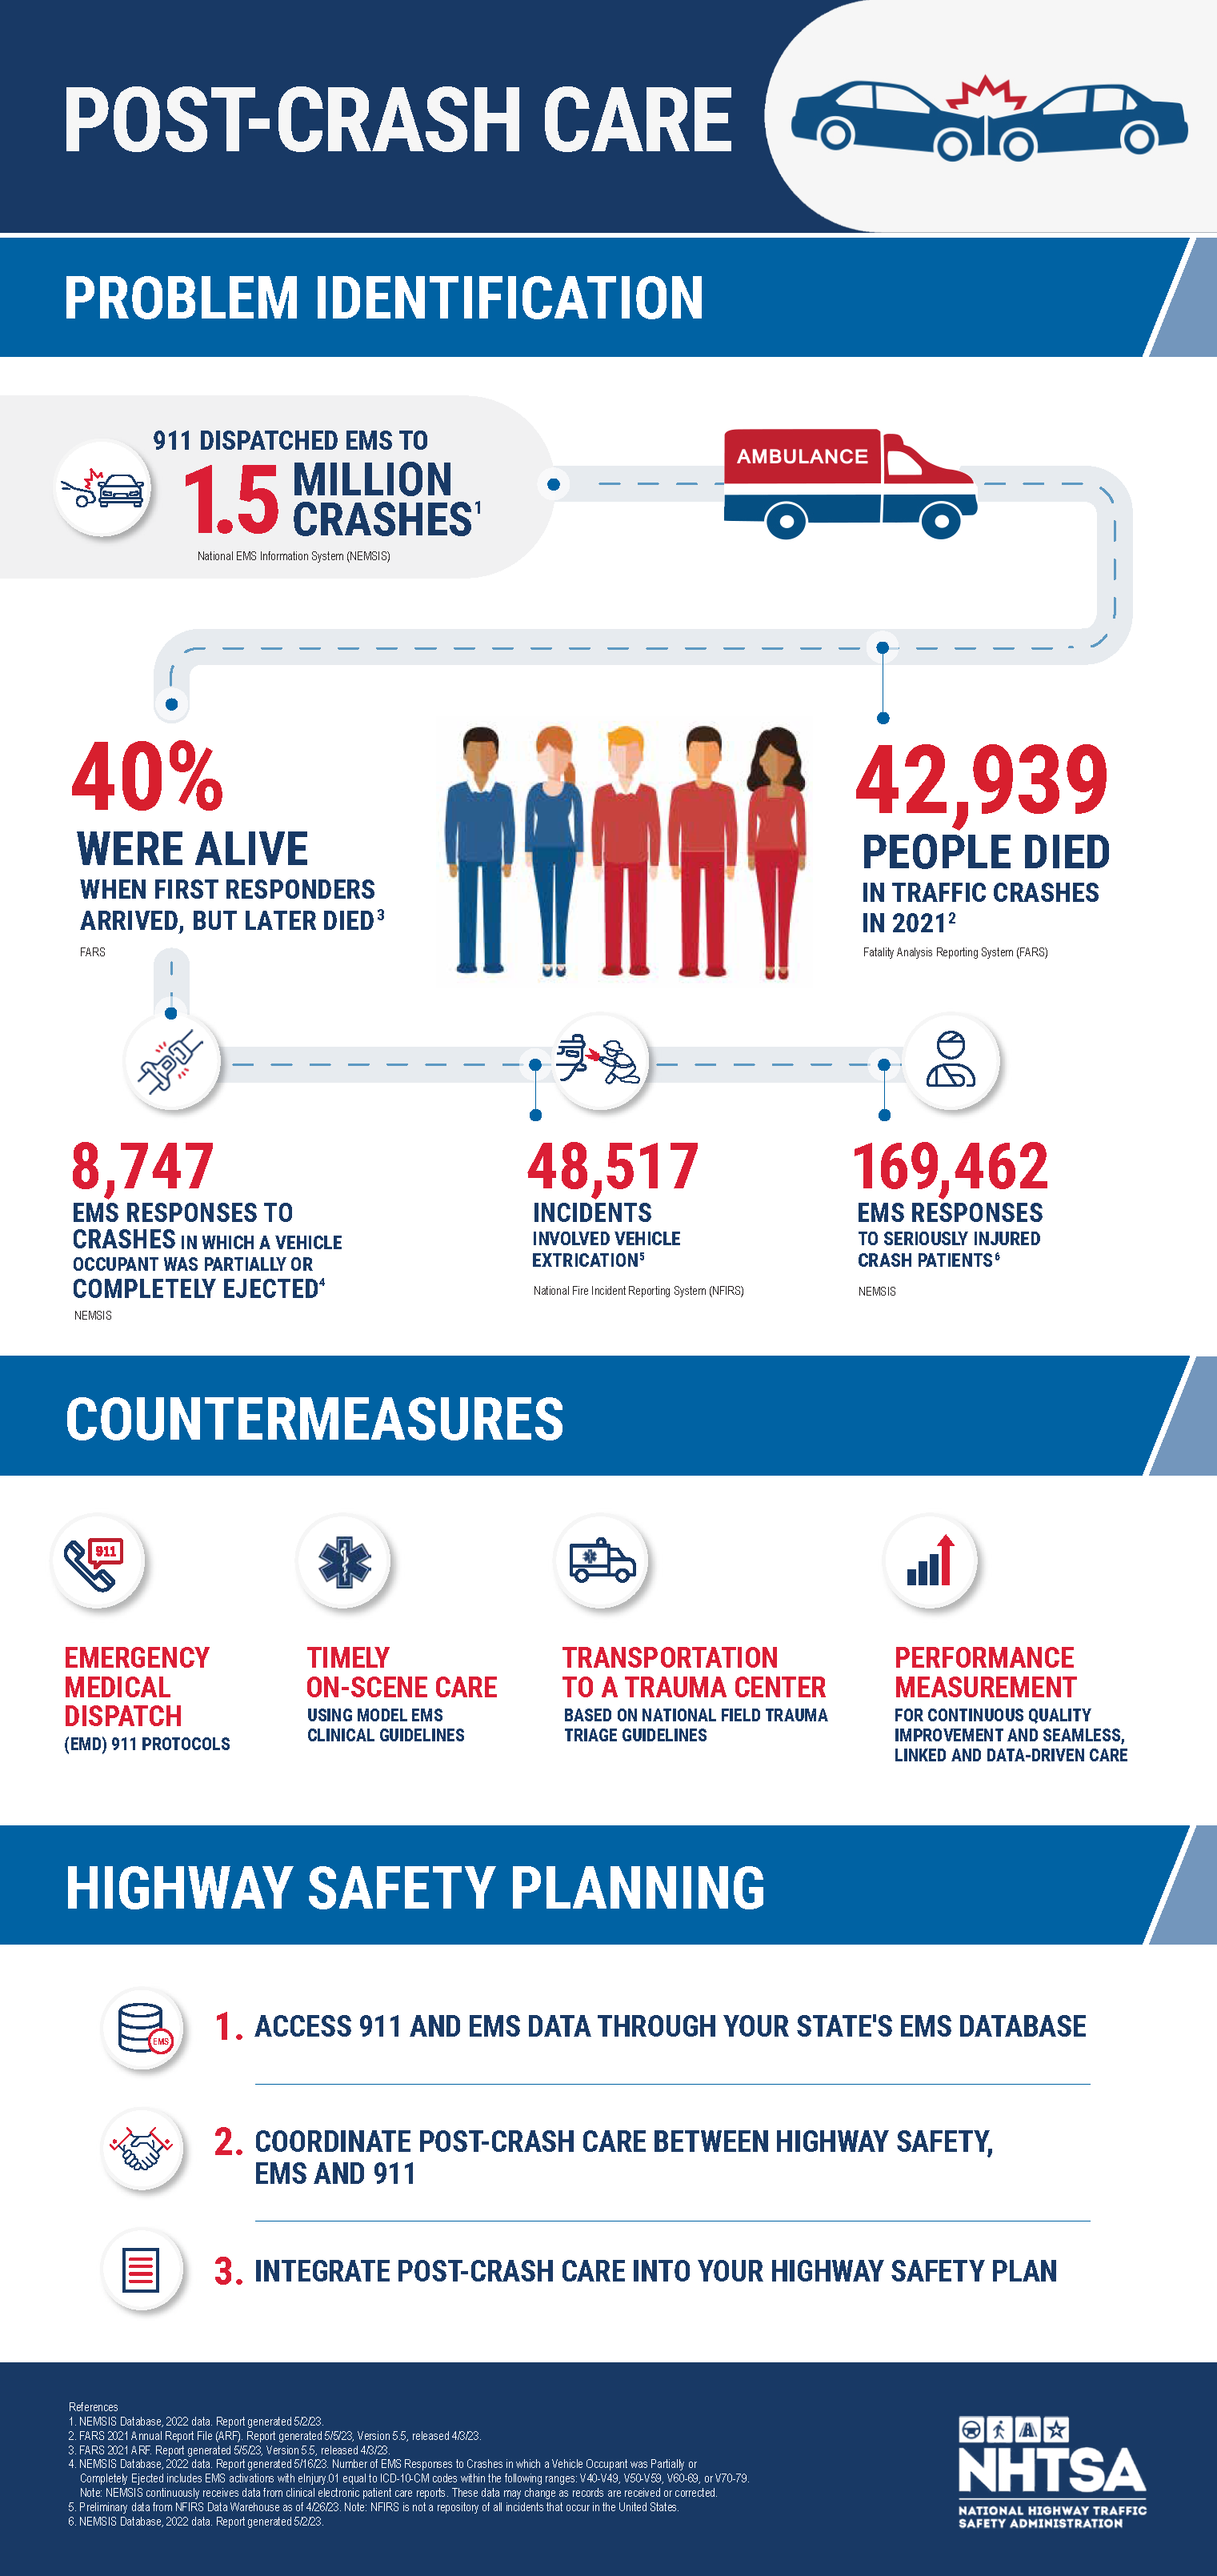 Download this infographic identifying the impact of post-crash care on highway safety.